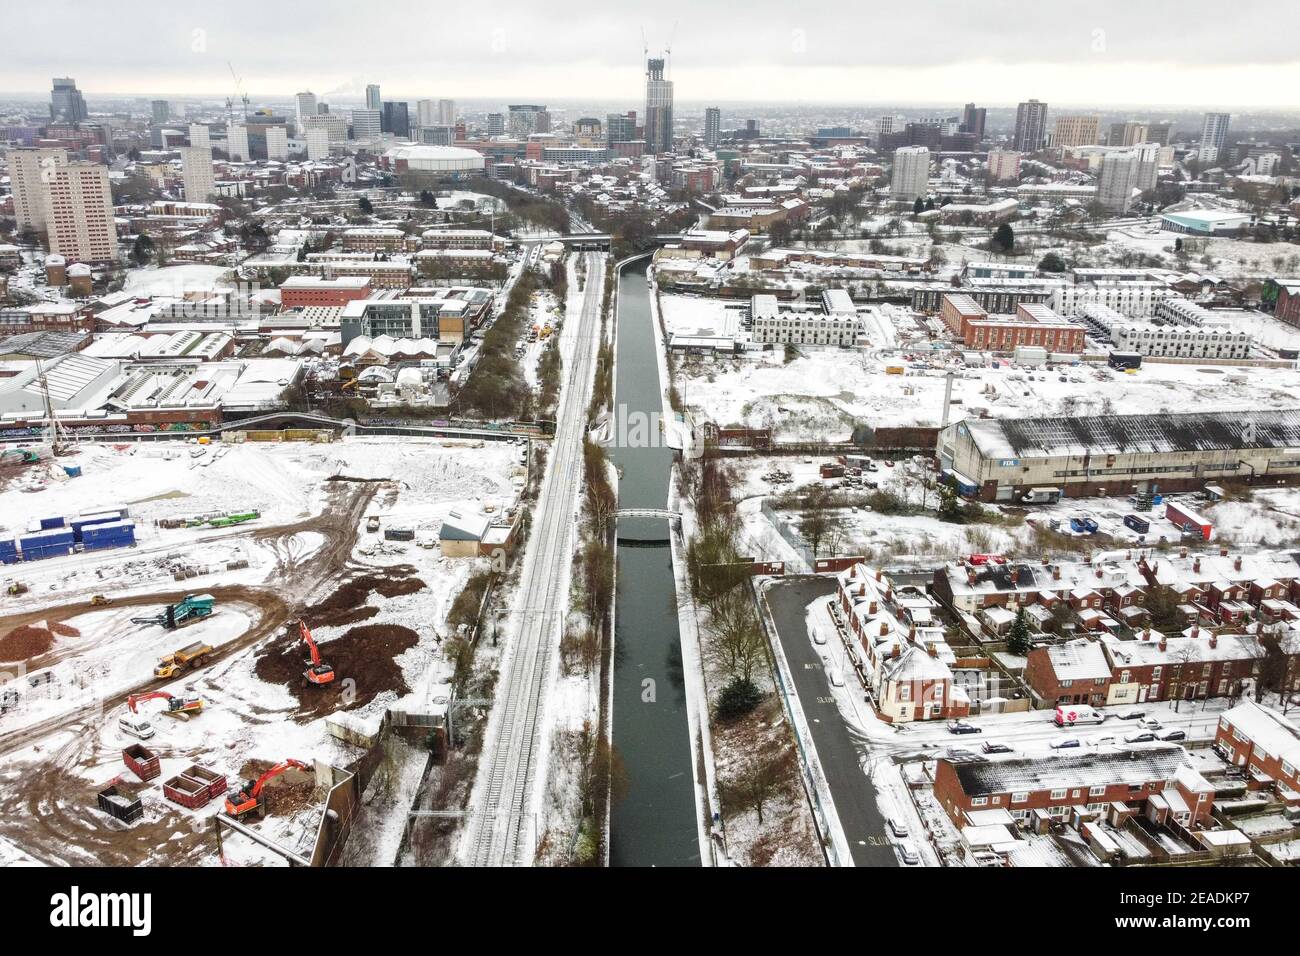 Birmingham, West Midlands, UK. 9th Feb, 2021. One of Birmingham's many canals leads into the city centre after a night of snowfall from Storm Darcy continues to blast the country. Pic by Credit: Sam Holiday/Alamy Live News Stock Photo